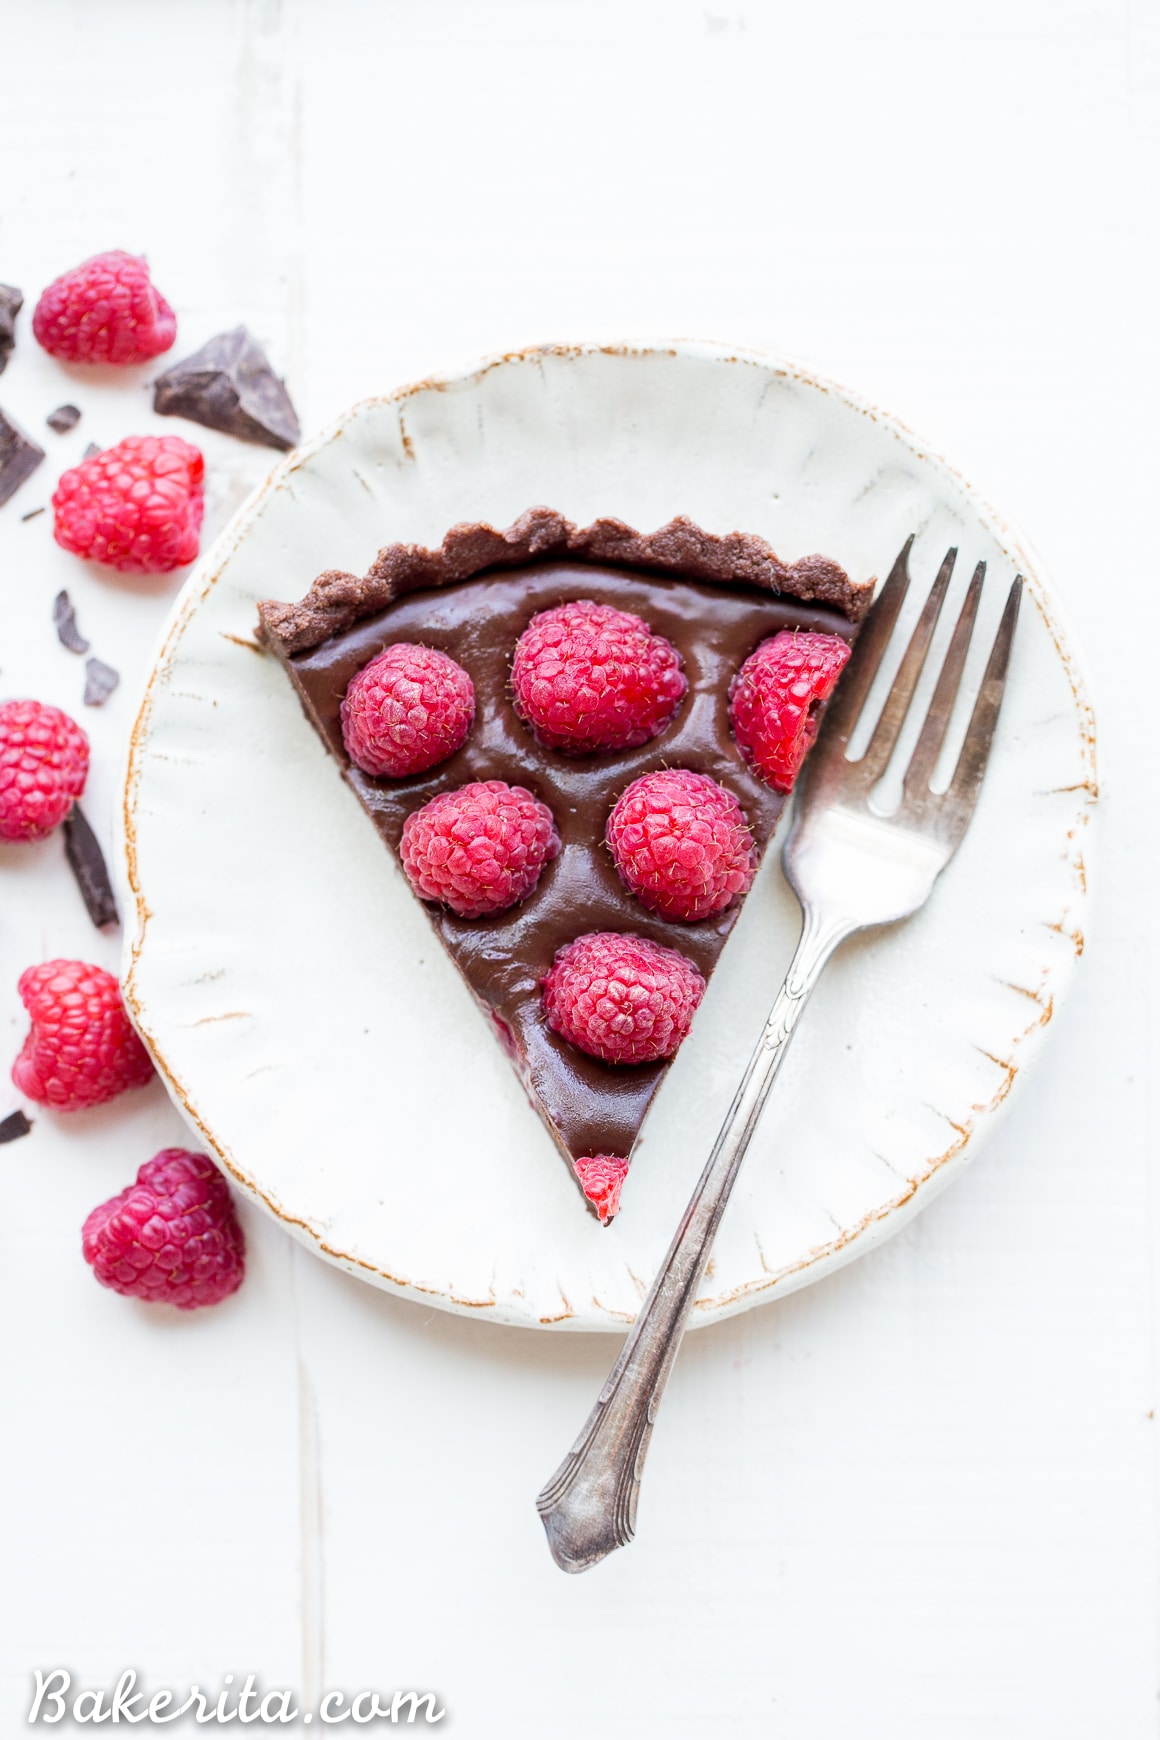 This No-Bake Raspberry Chocolate Tart comes together in just ten minutes! The no-bake chocolate crust is filled with vegan chocolate ganache and topped with fresh raspberries for a decadent, guilt-free treat.